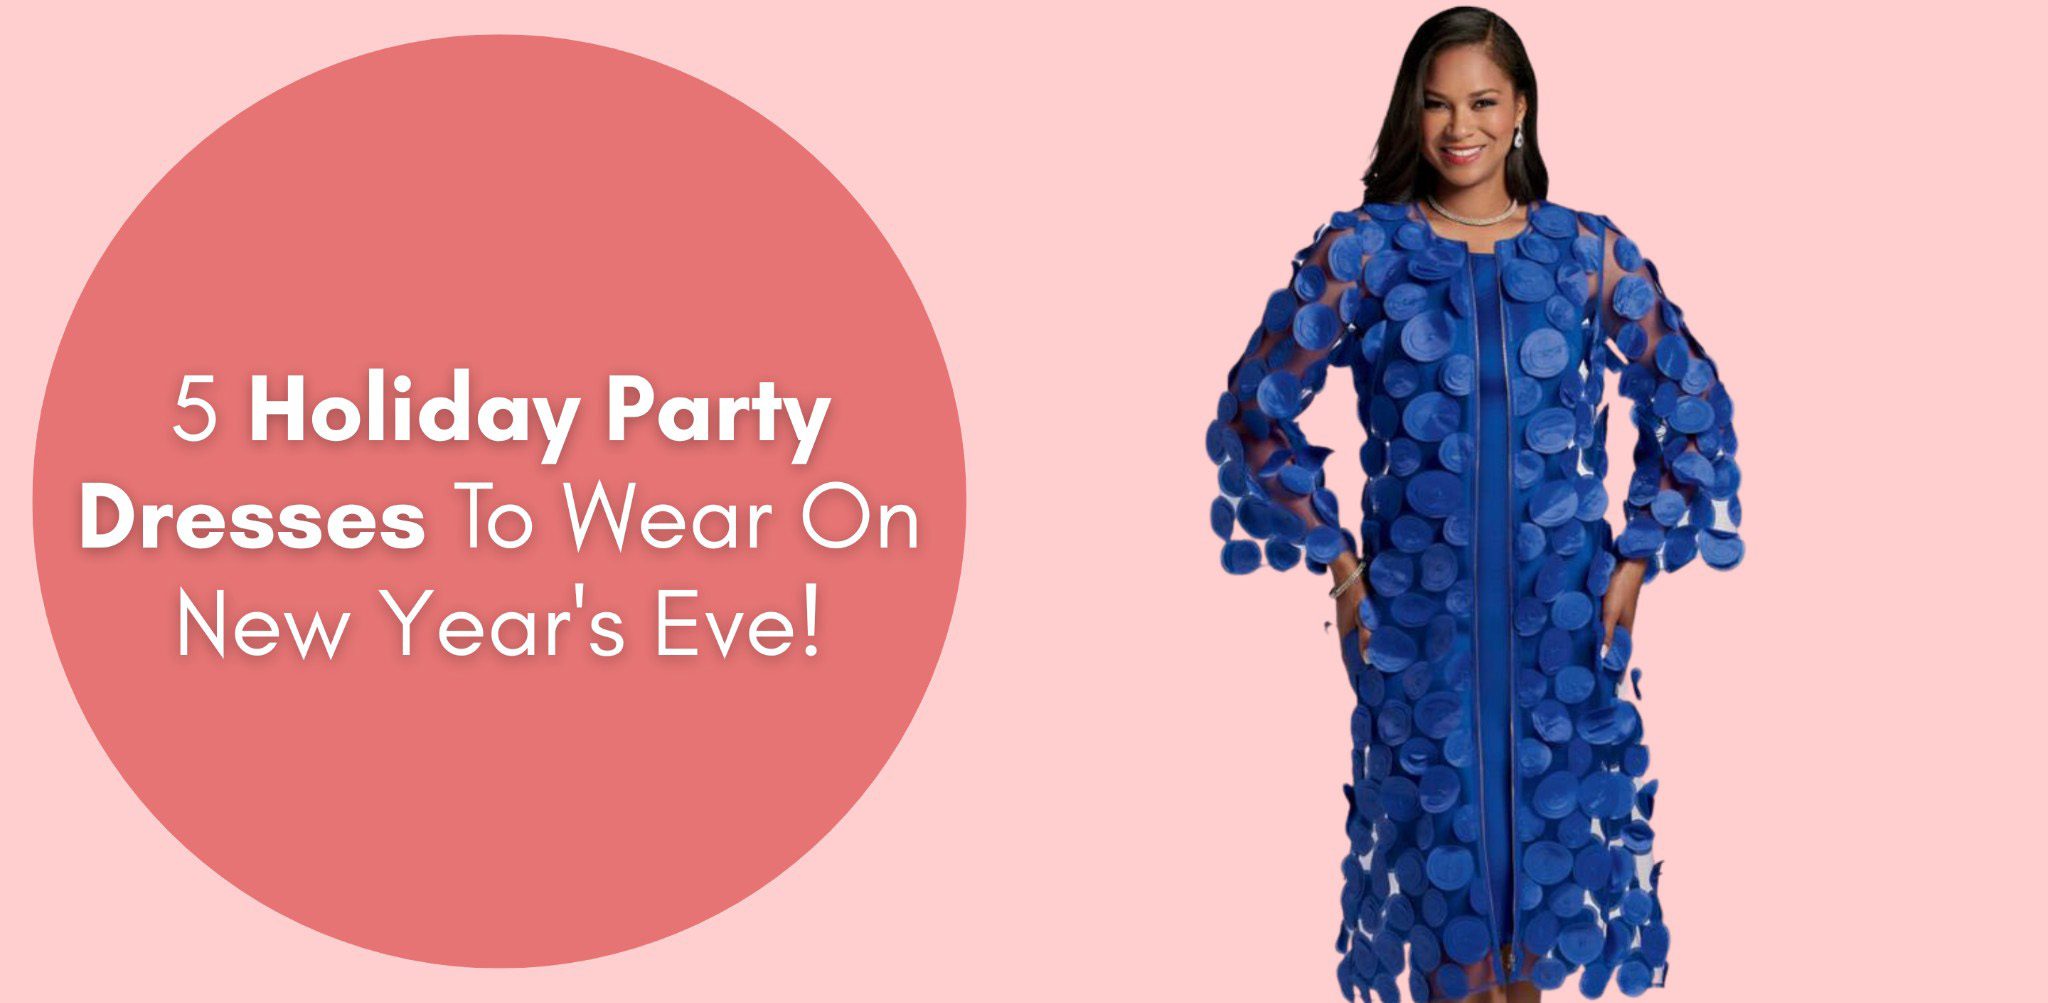 5 Holiday Party Dresses To Wear On New Year’s Eve! | Especially Yours